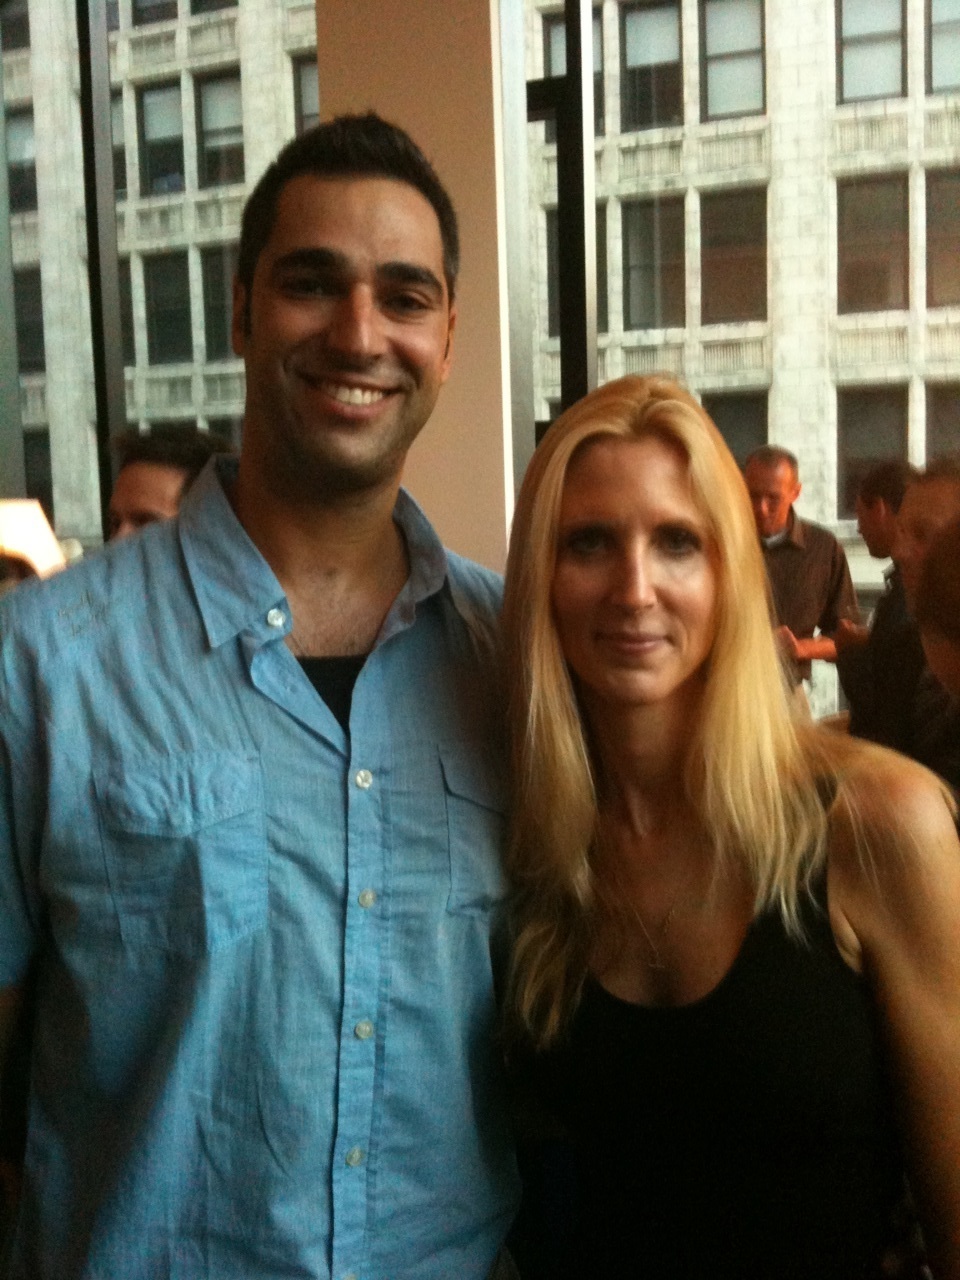 The Buttered Topping: Ann Coulter and the Gays made love last night at  Homocon